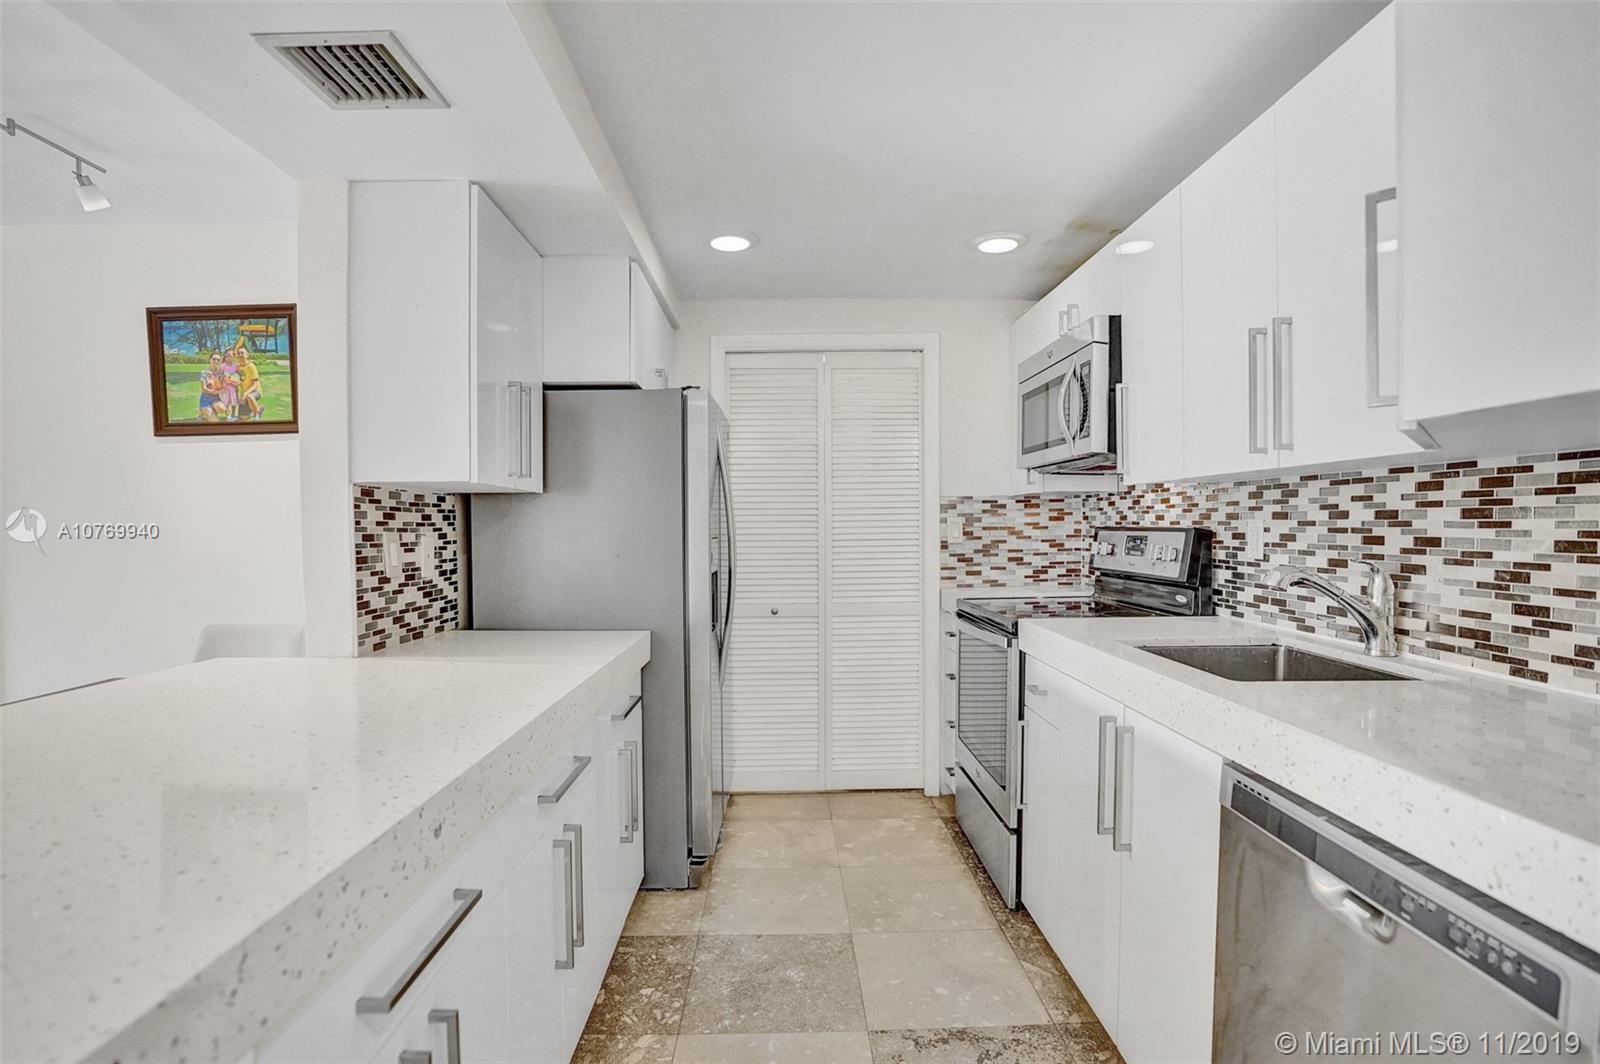 Upgraded Kitchen with Quartz Countertops, Stone Backsplash and Stainless Steel Appliances